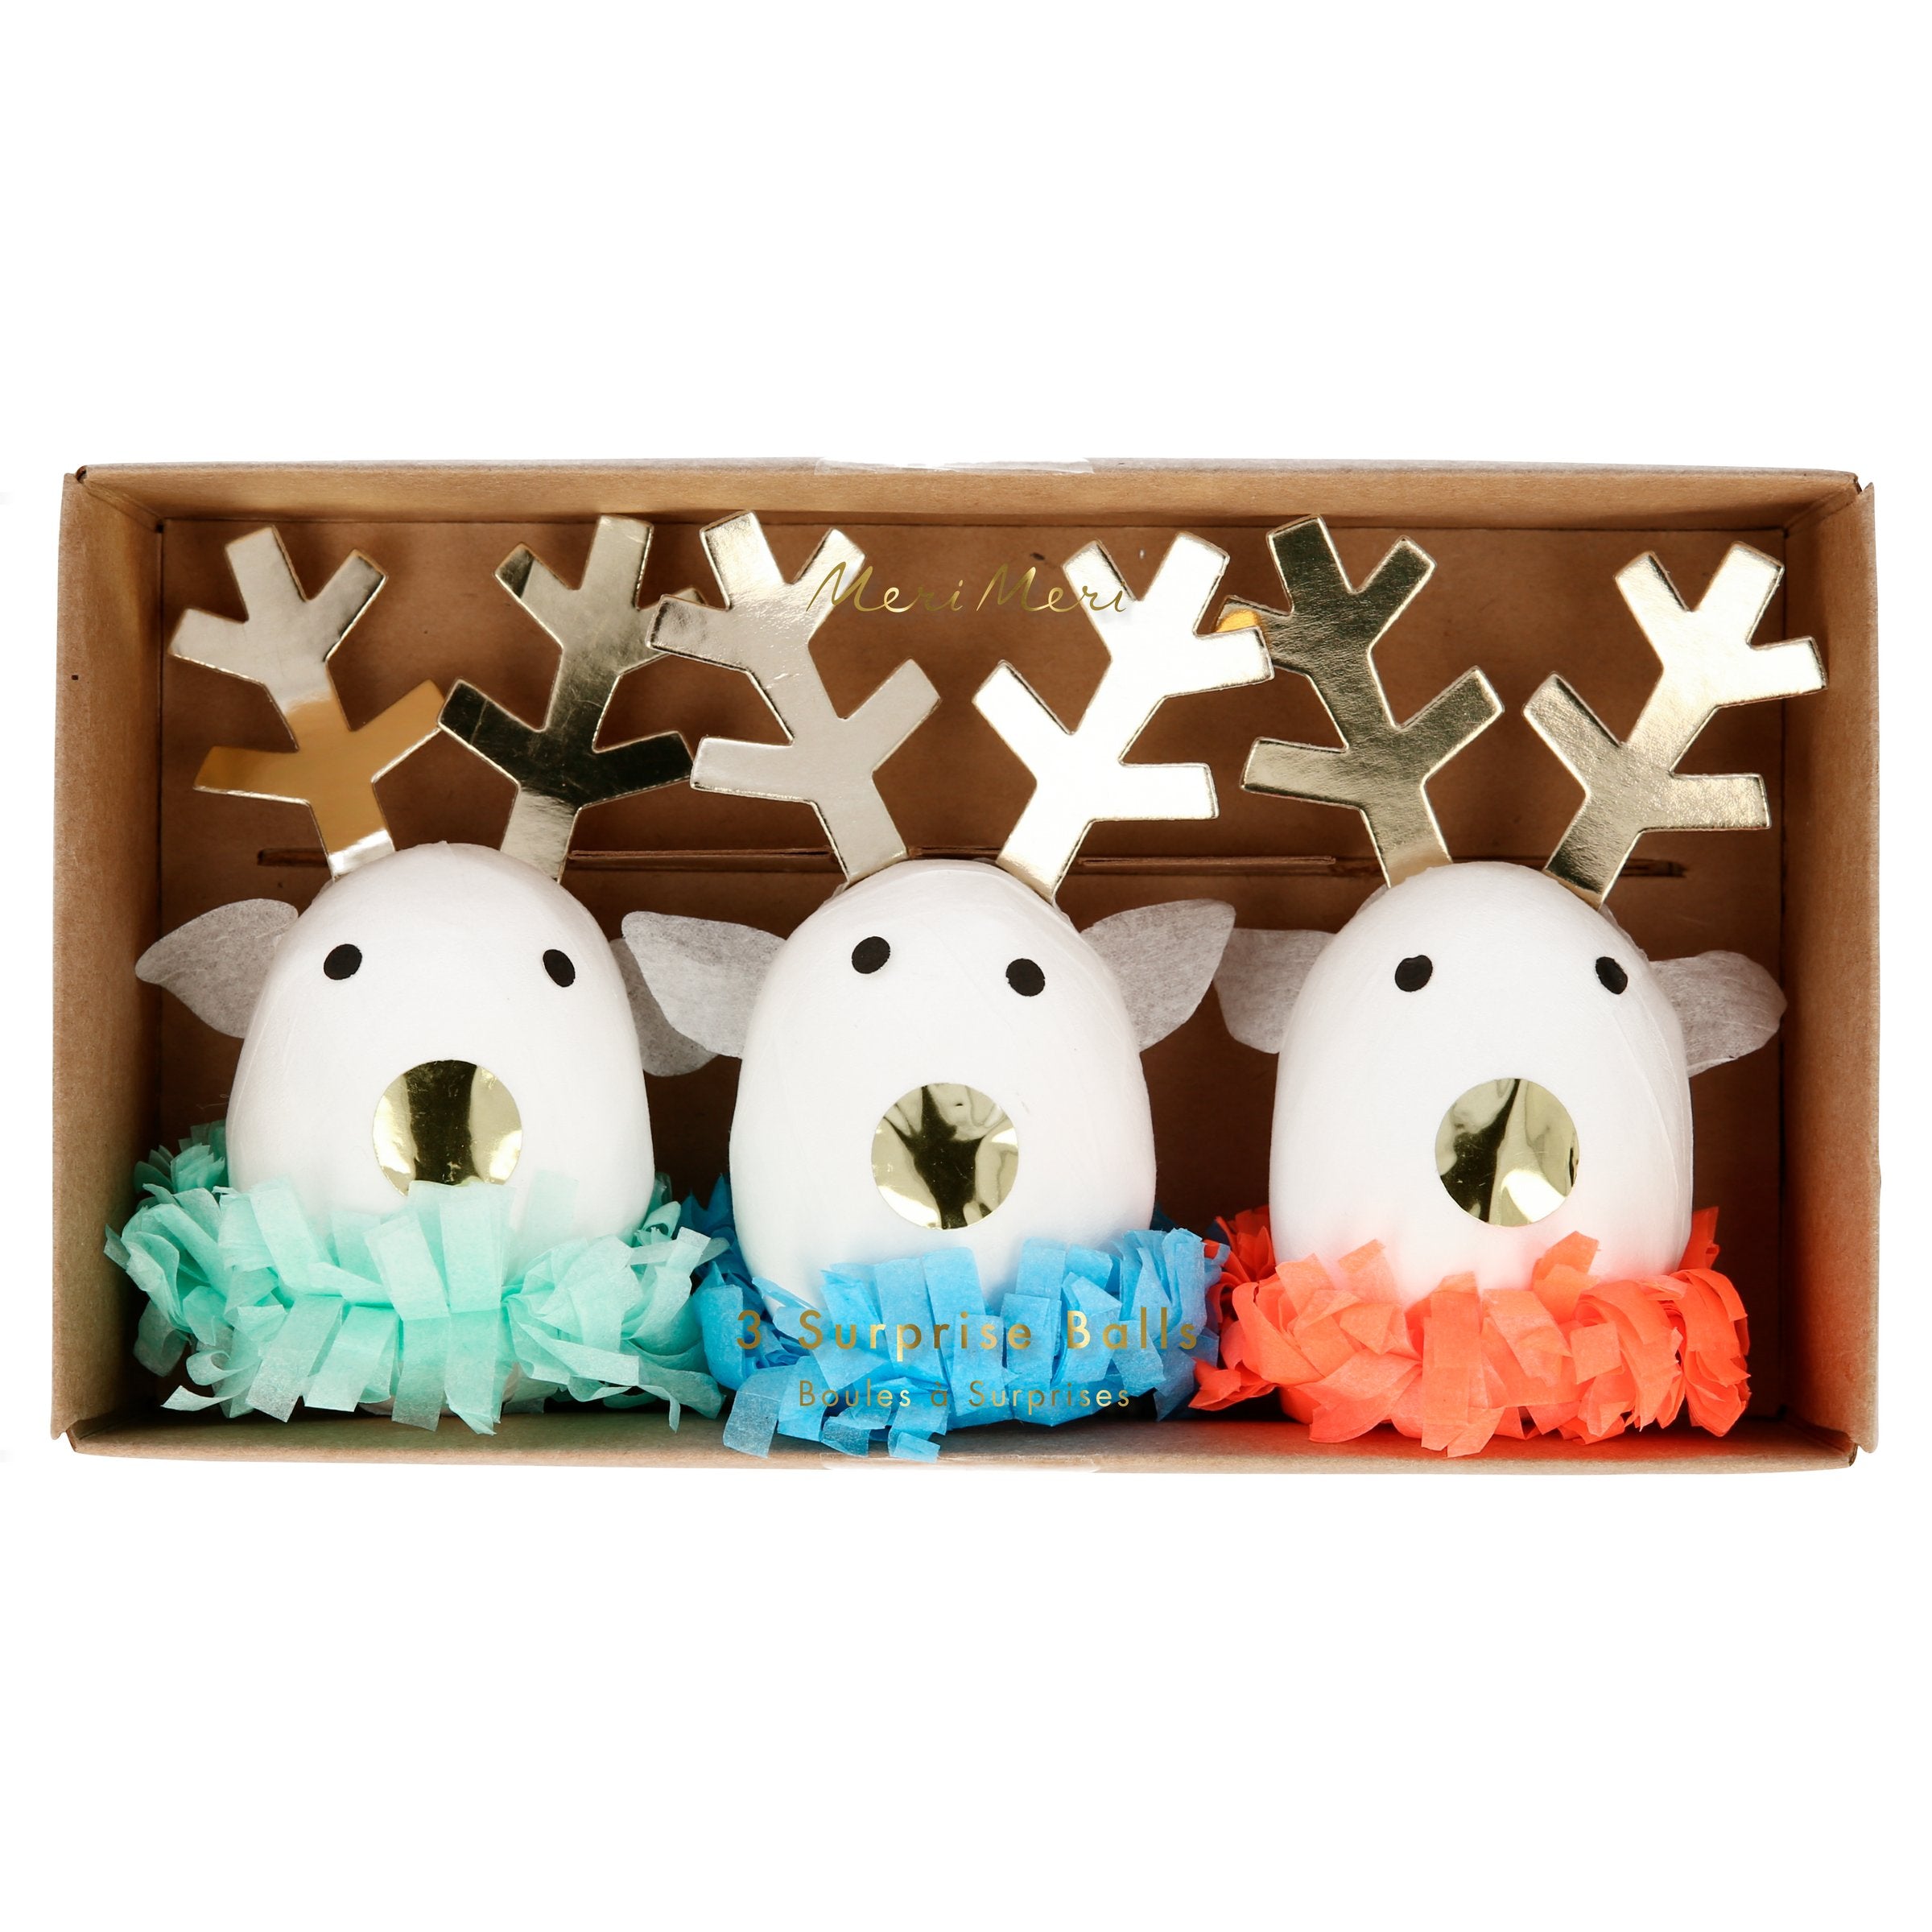 Our reindeer surprise balls are fabulous gifts for party guests.